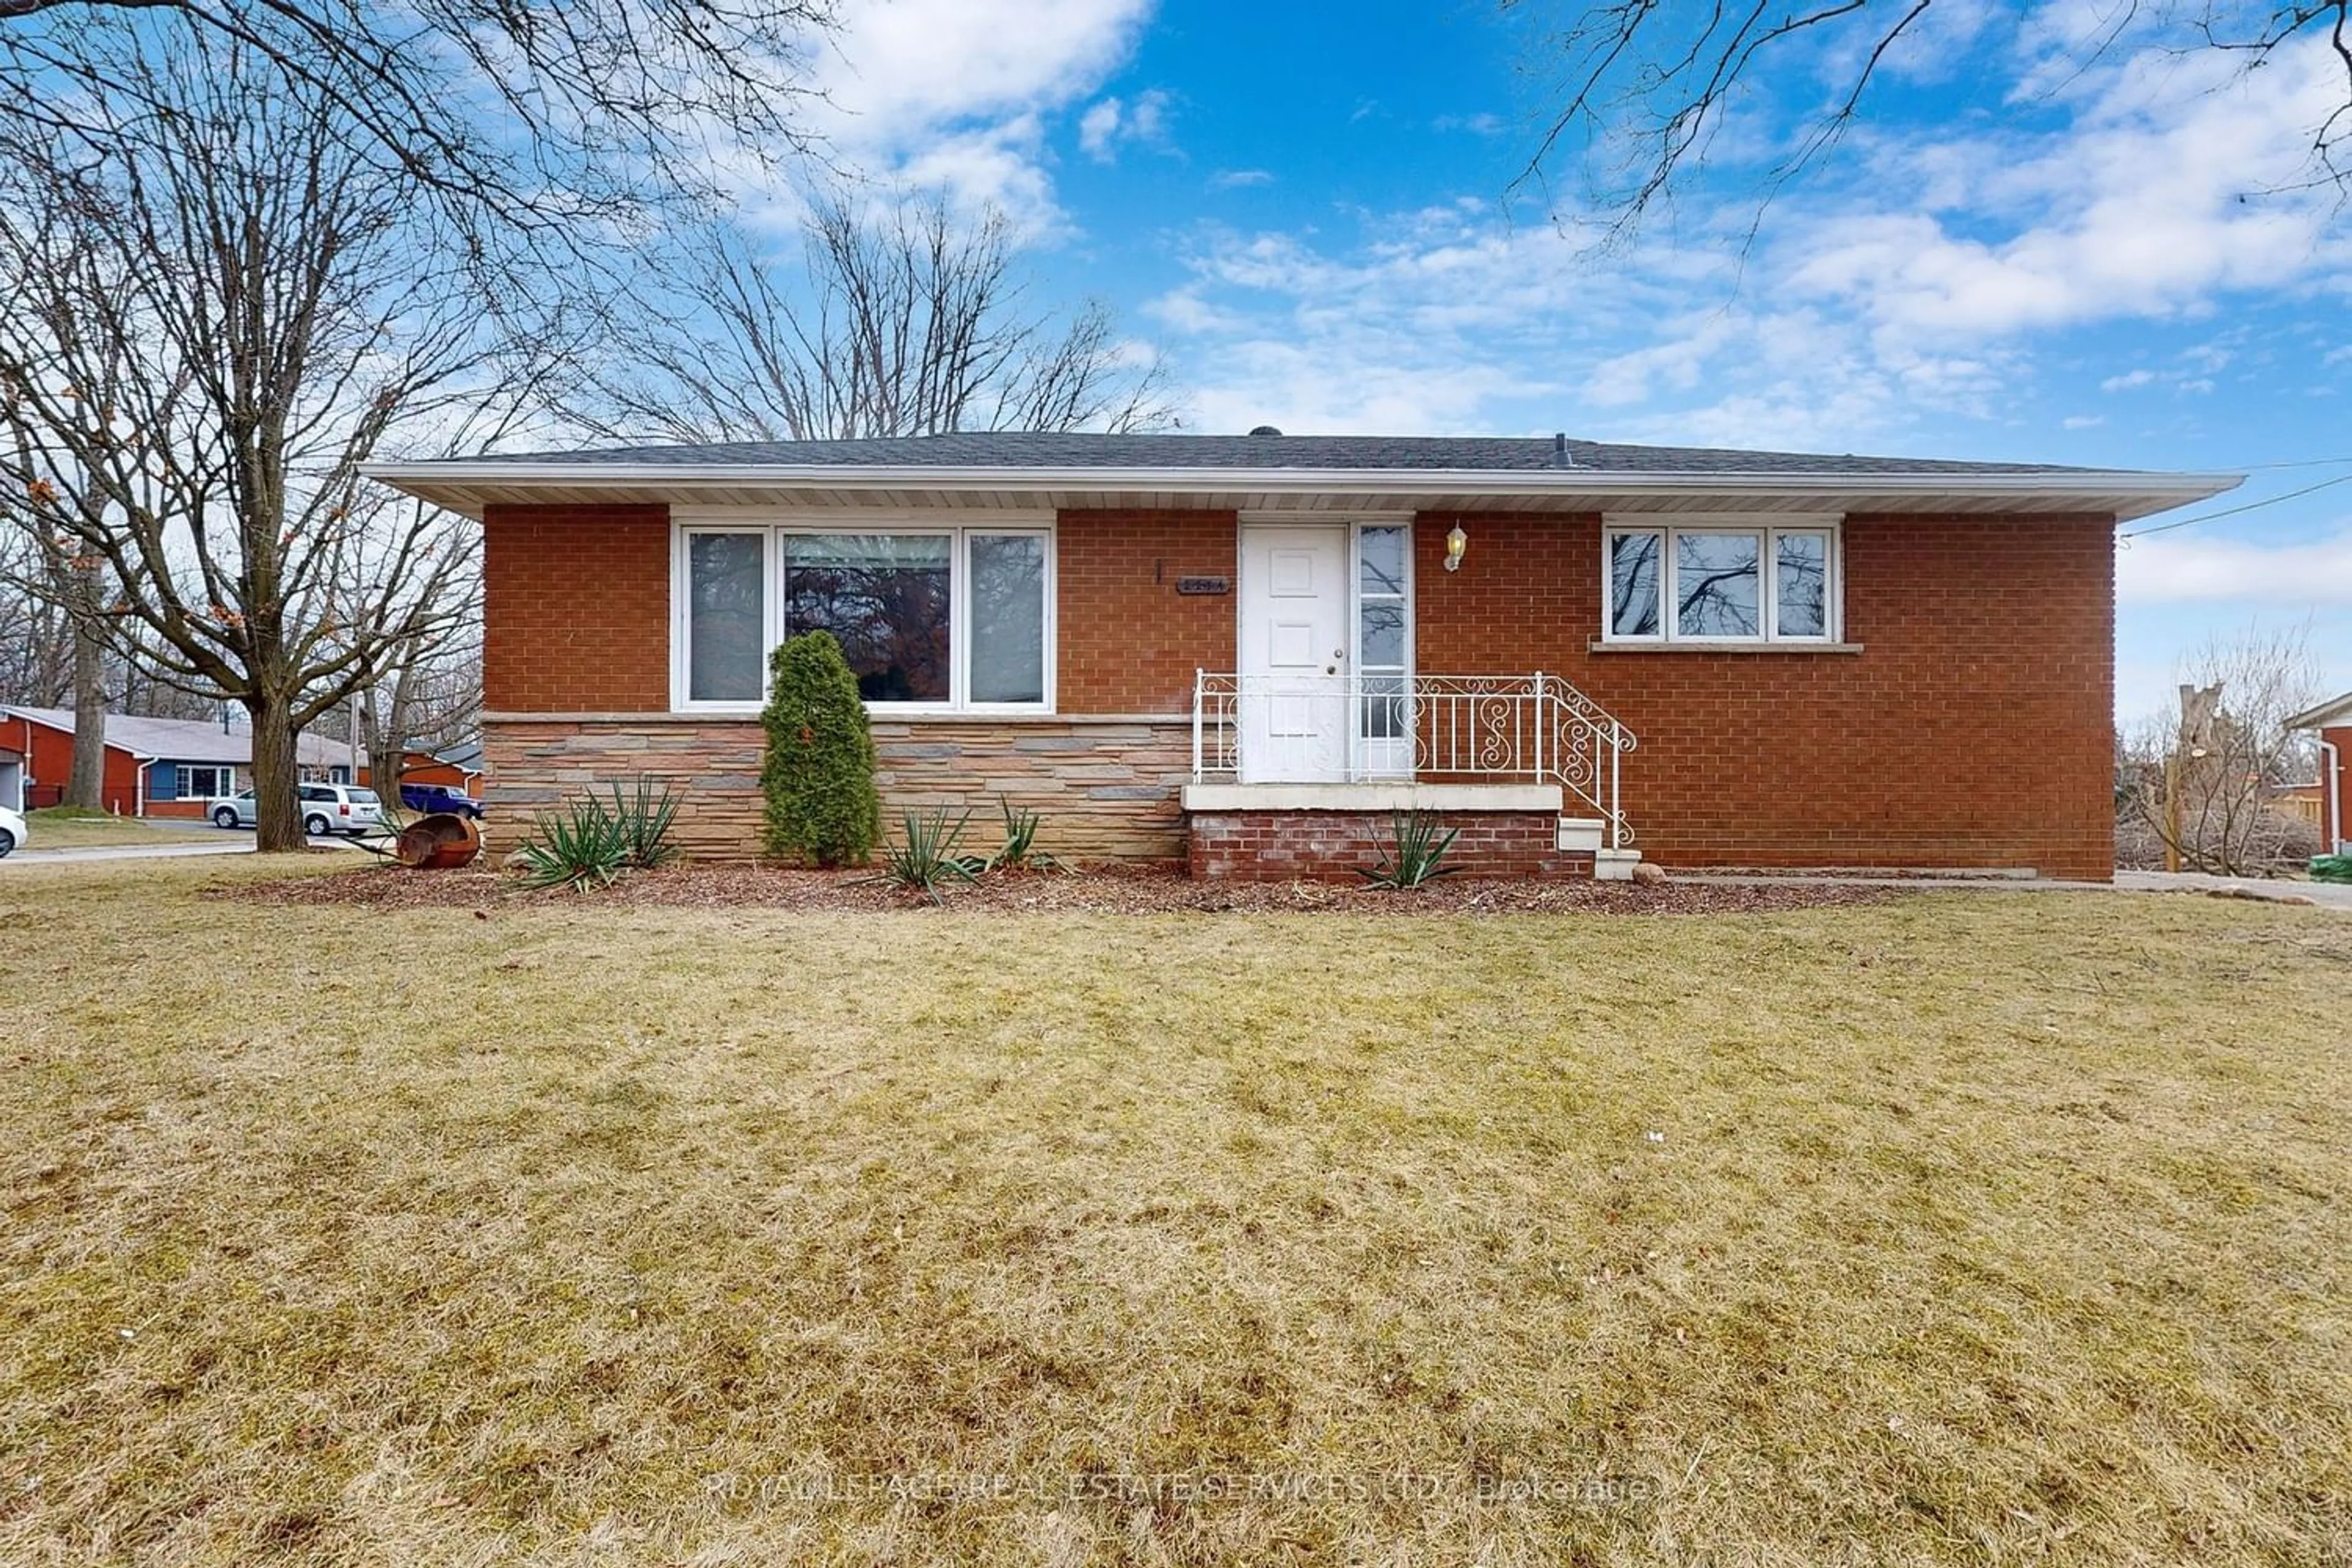 Home with brick exterior material for 2214 Mount Forest Dr, Burlington Ontario L7P 1H9